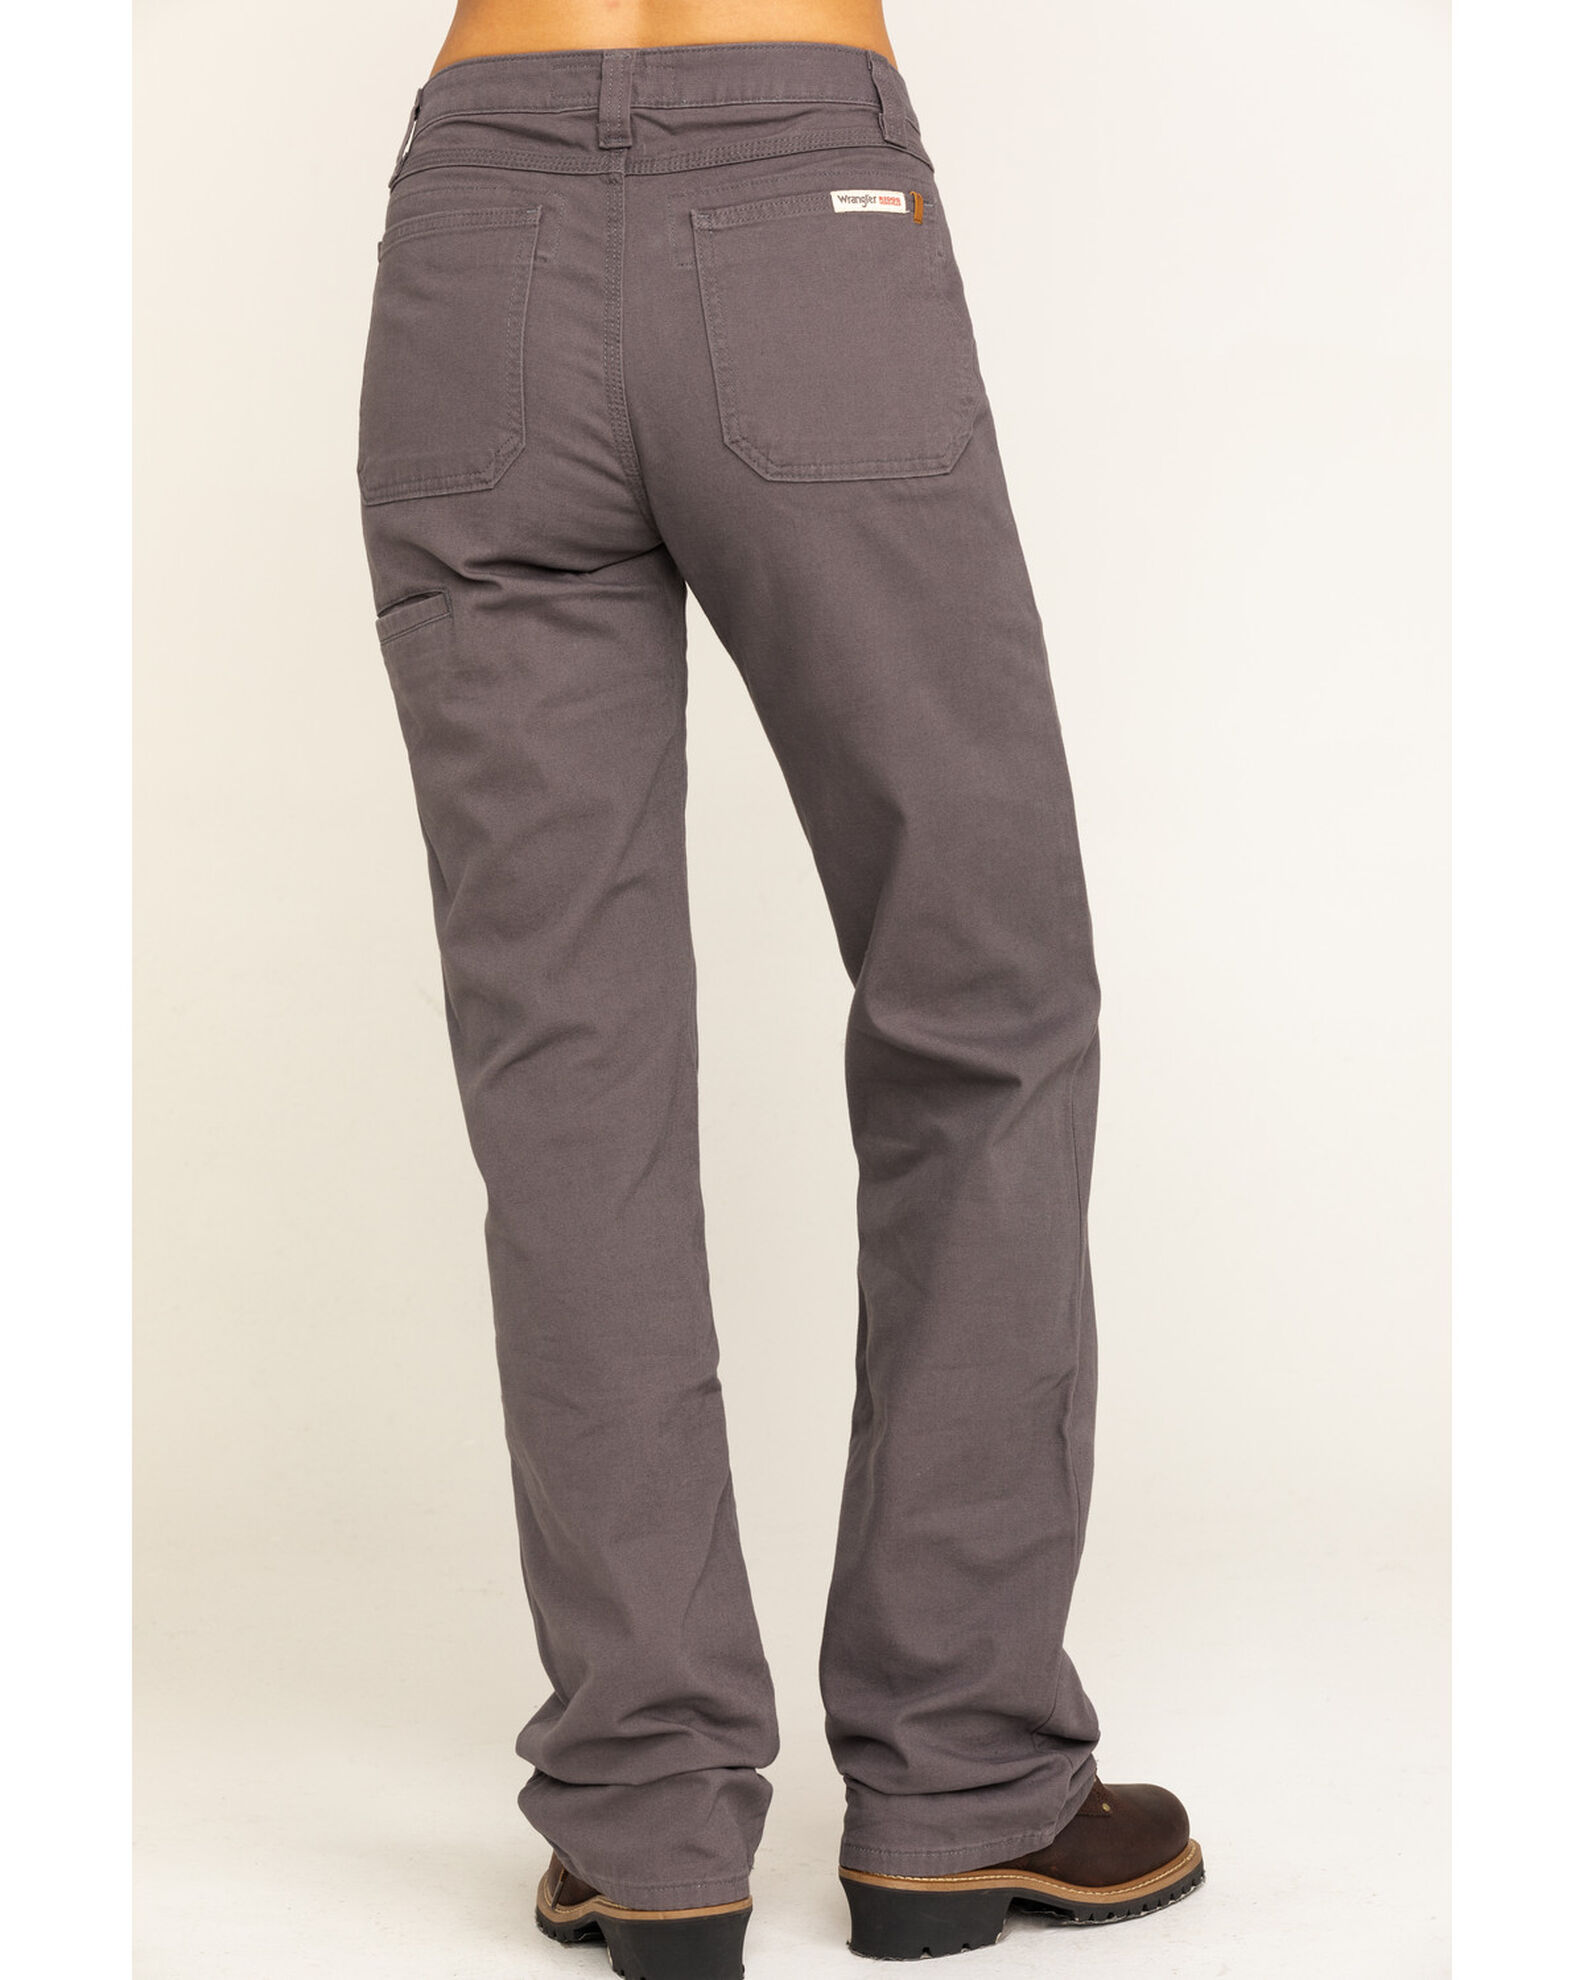 Wrangler Riggs Women's Advanced Comfort Work Pants - Country Outfitter